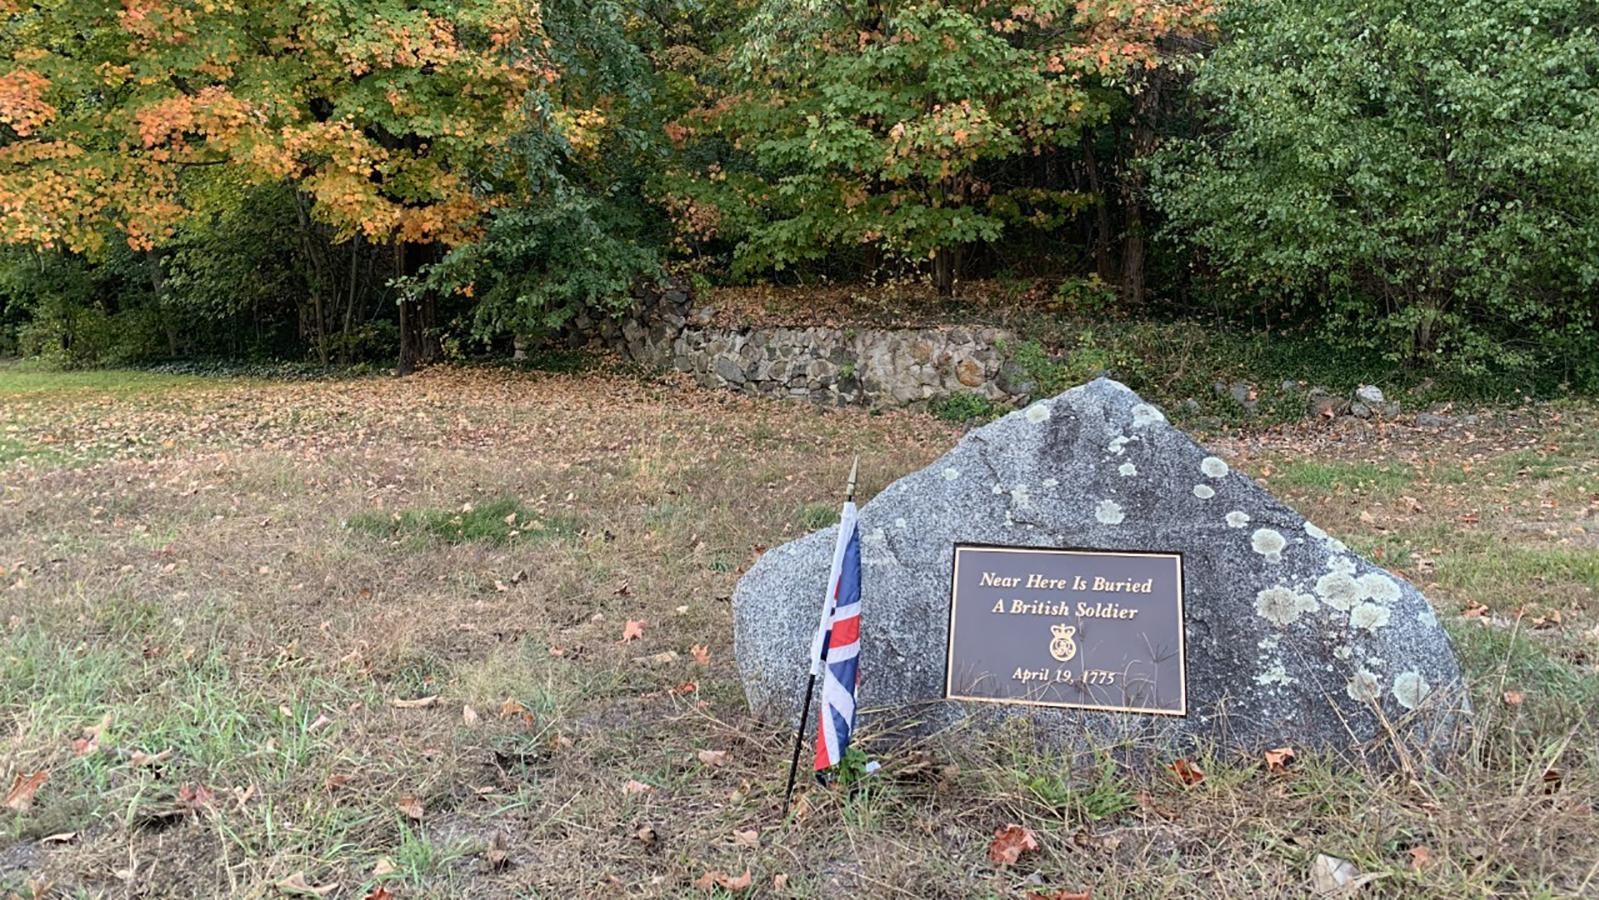 A stone grave marker for British soldiers sits before a tall stone fence in front of a tree lot.